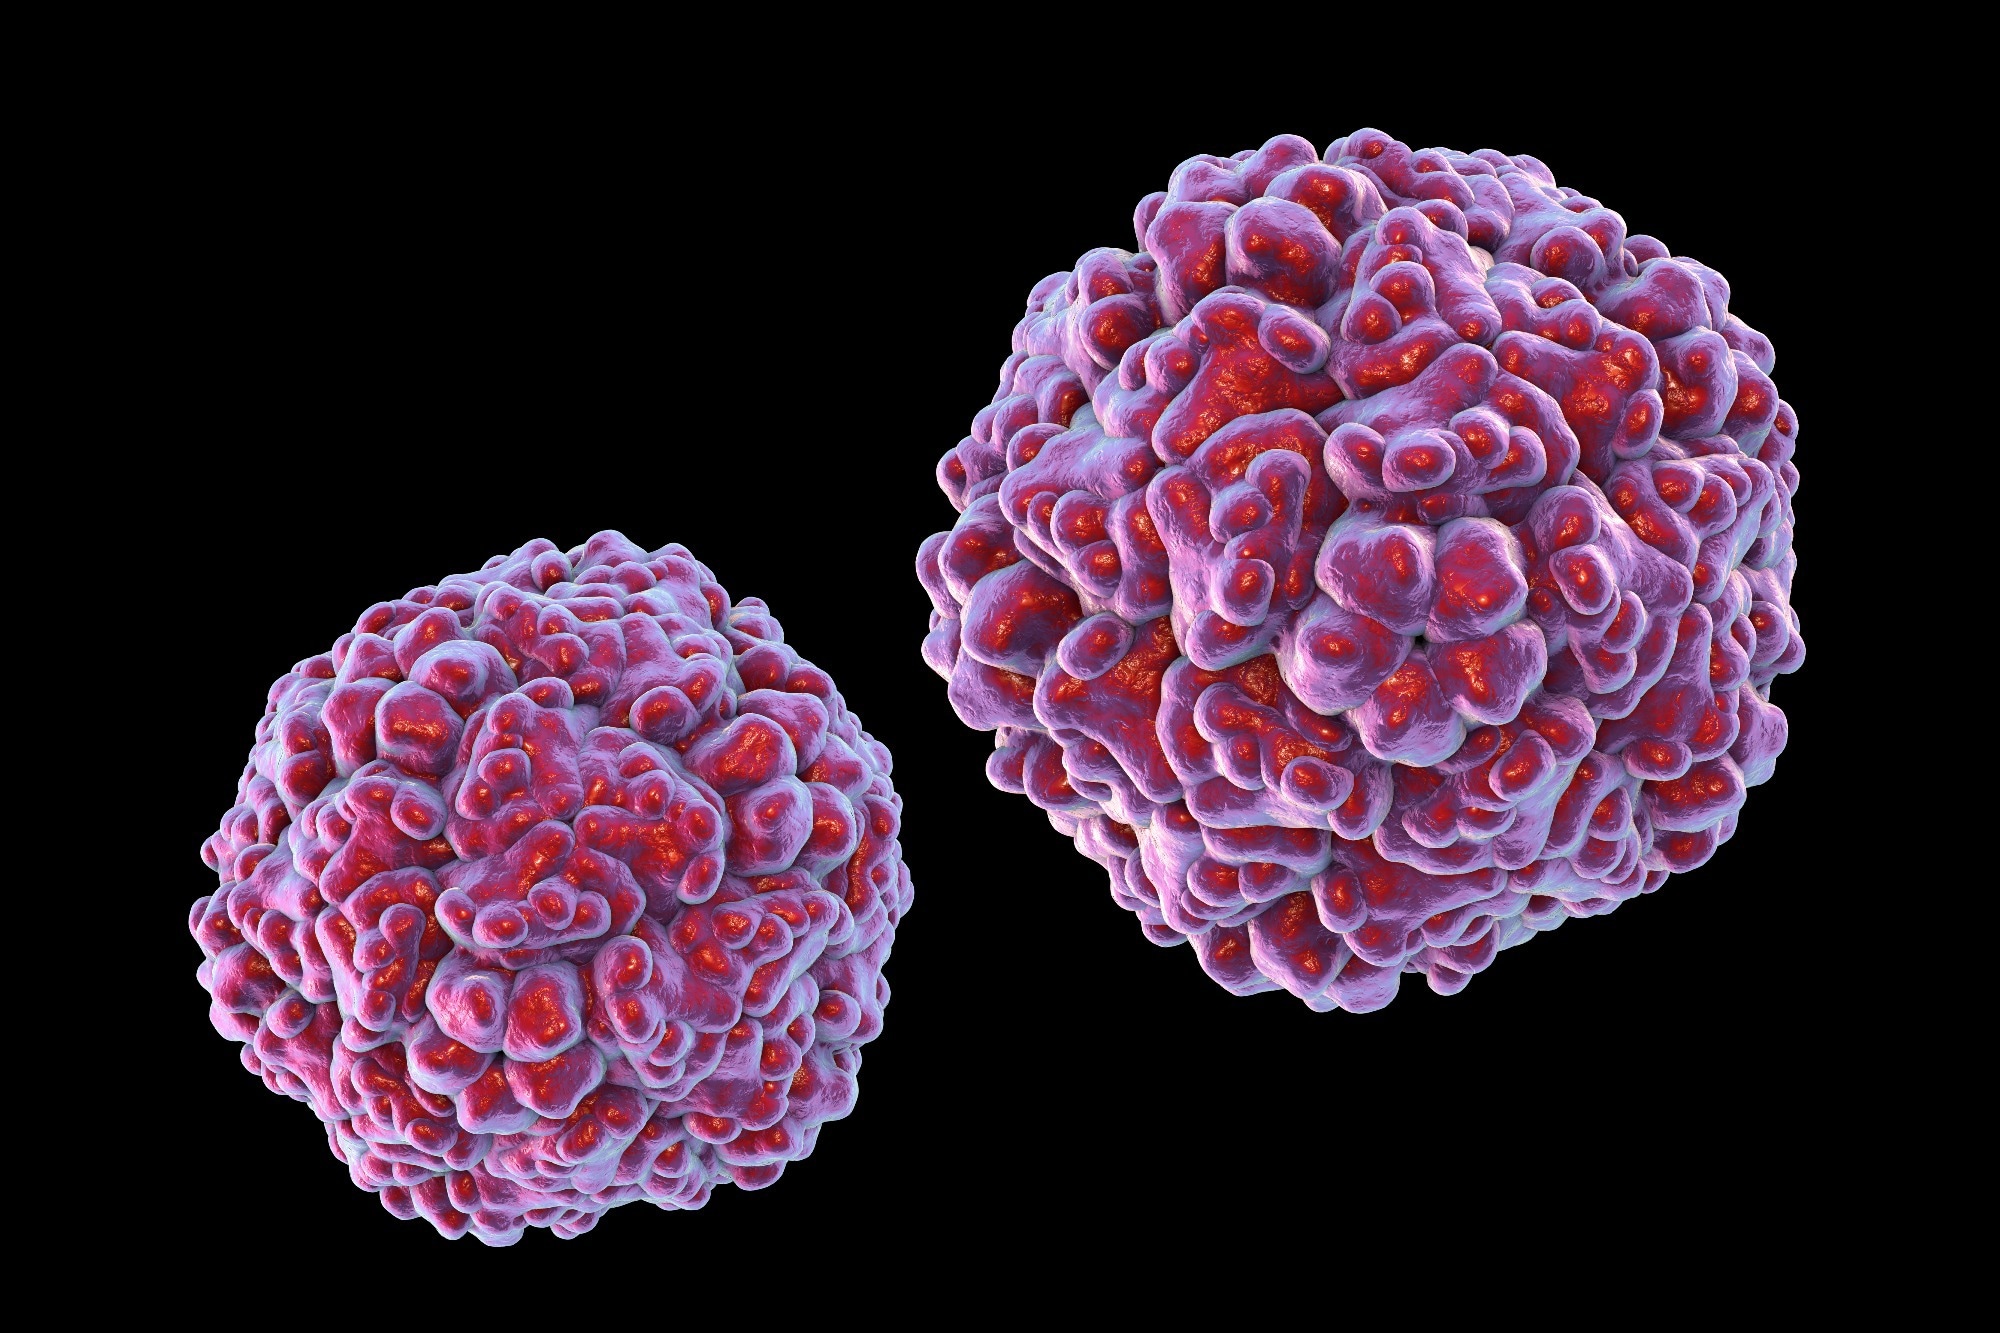 Study: EV-D68 virus-like particle vaccines elicit cross-clade neutralizing antibodies that inhibit infection and block dissemination. Image Credit: KaterynaKon/Shutterstock.com